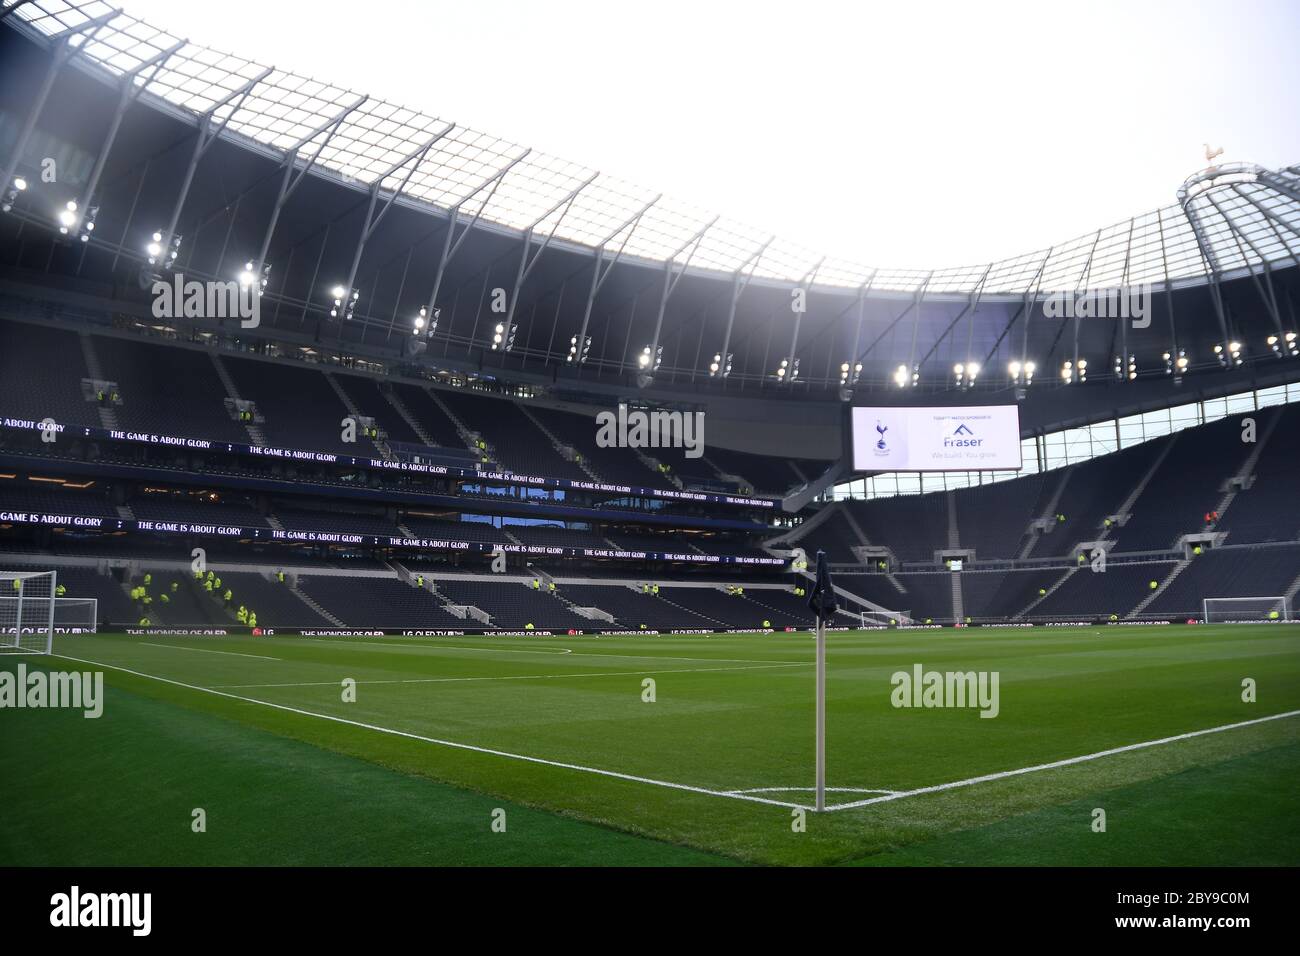 LONDON, ENGLAND - APRIL 13, 2019: General view of the venue seen prior to the 2018/19 Premier League game between Tottenham Hotspur and Huddersfield Twon at Tottenham Hotspur Stadium. Stock Photo